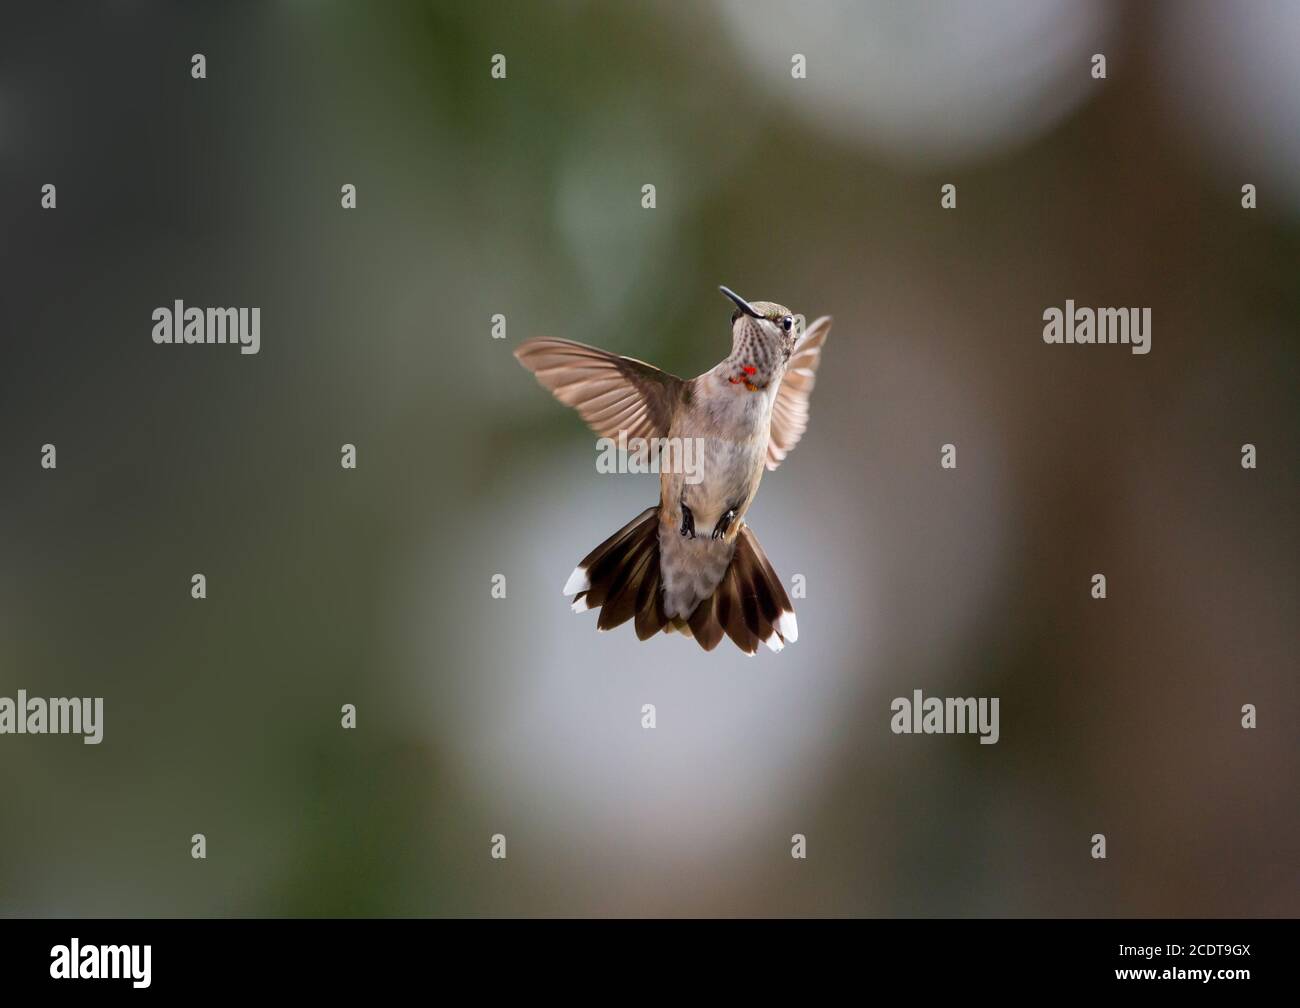 An immature male ruby-throated hummingbird hovering against a blurred background. Stock Photo